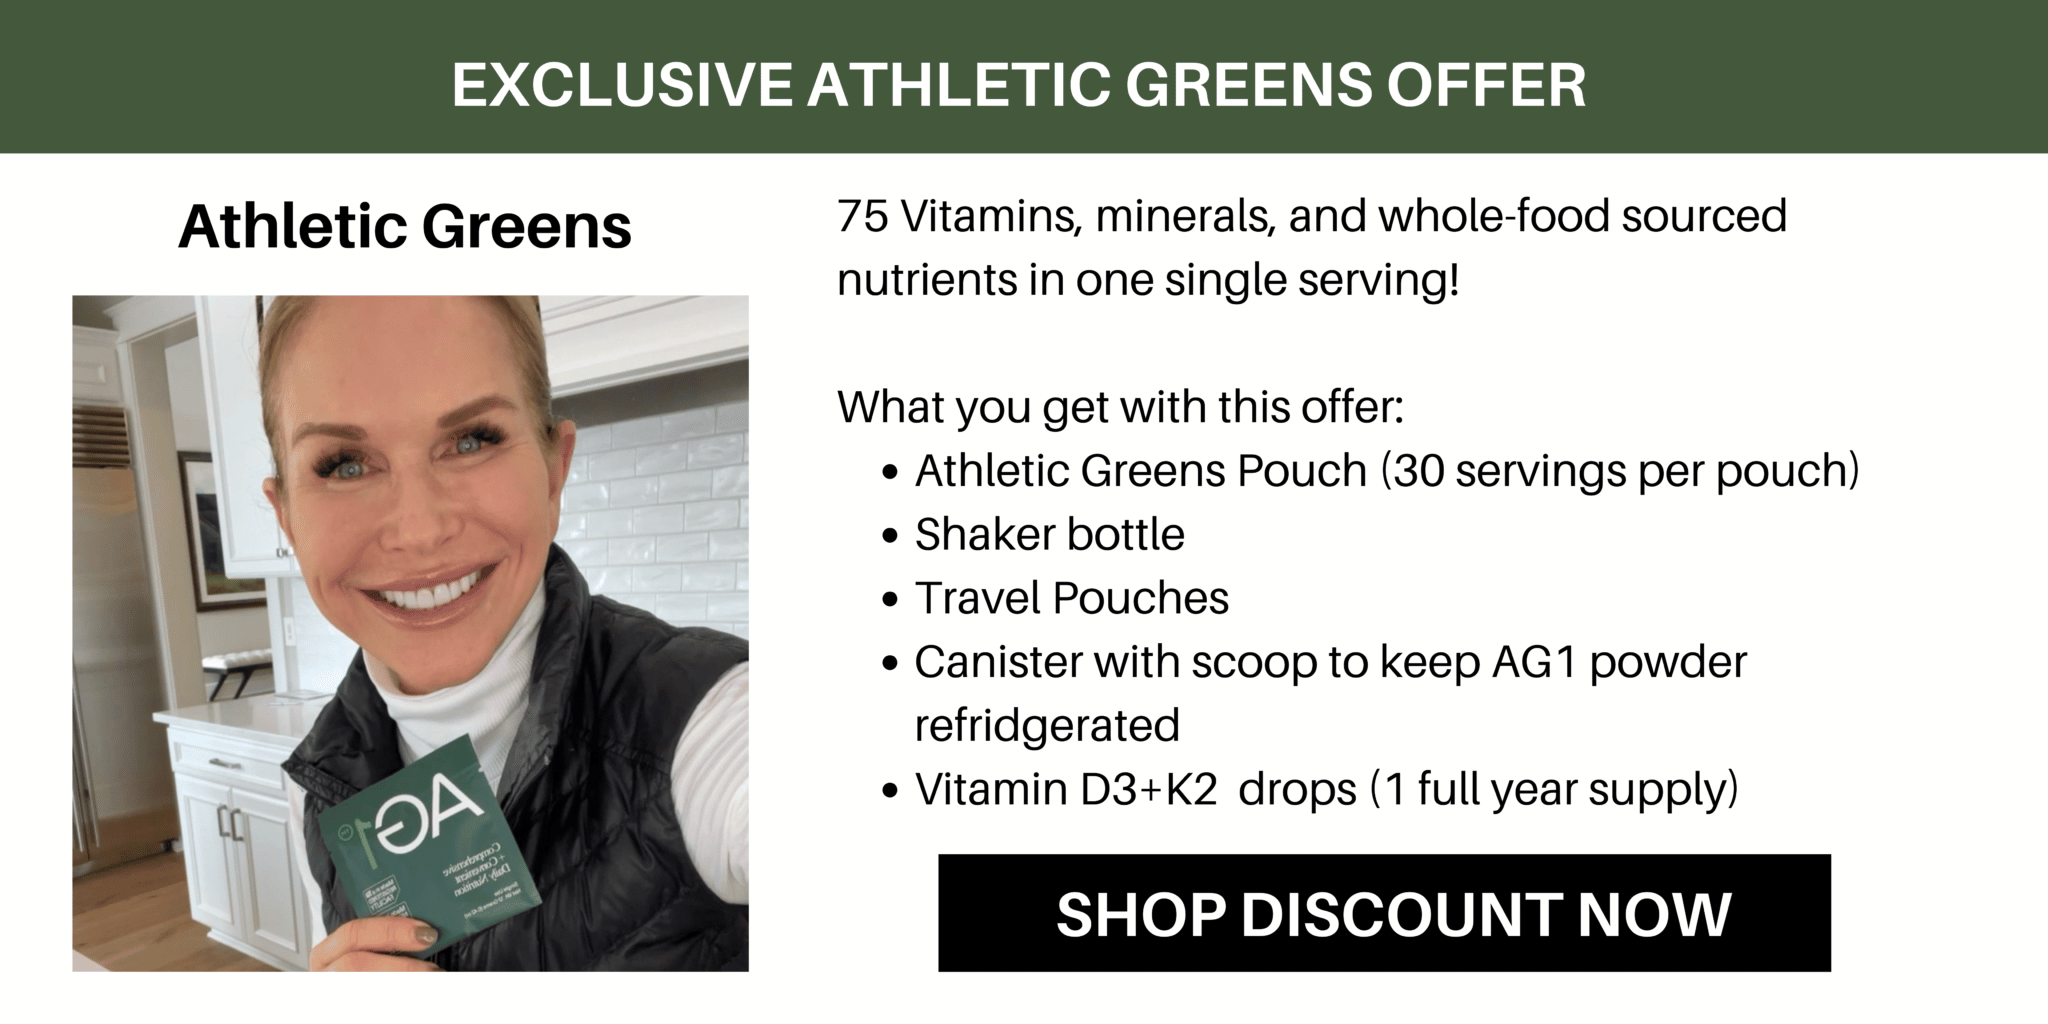 Athletic Greens Exclusive Offer